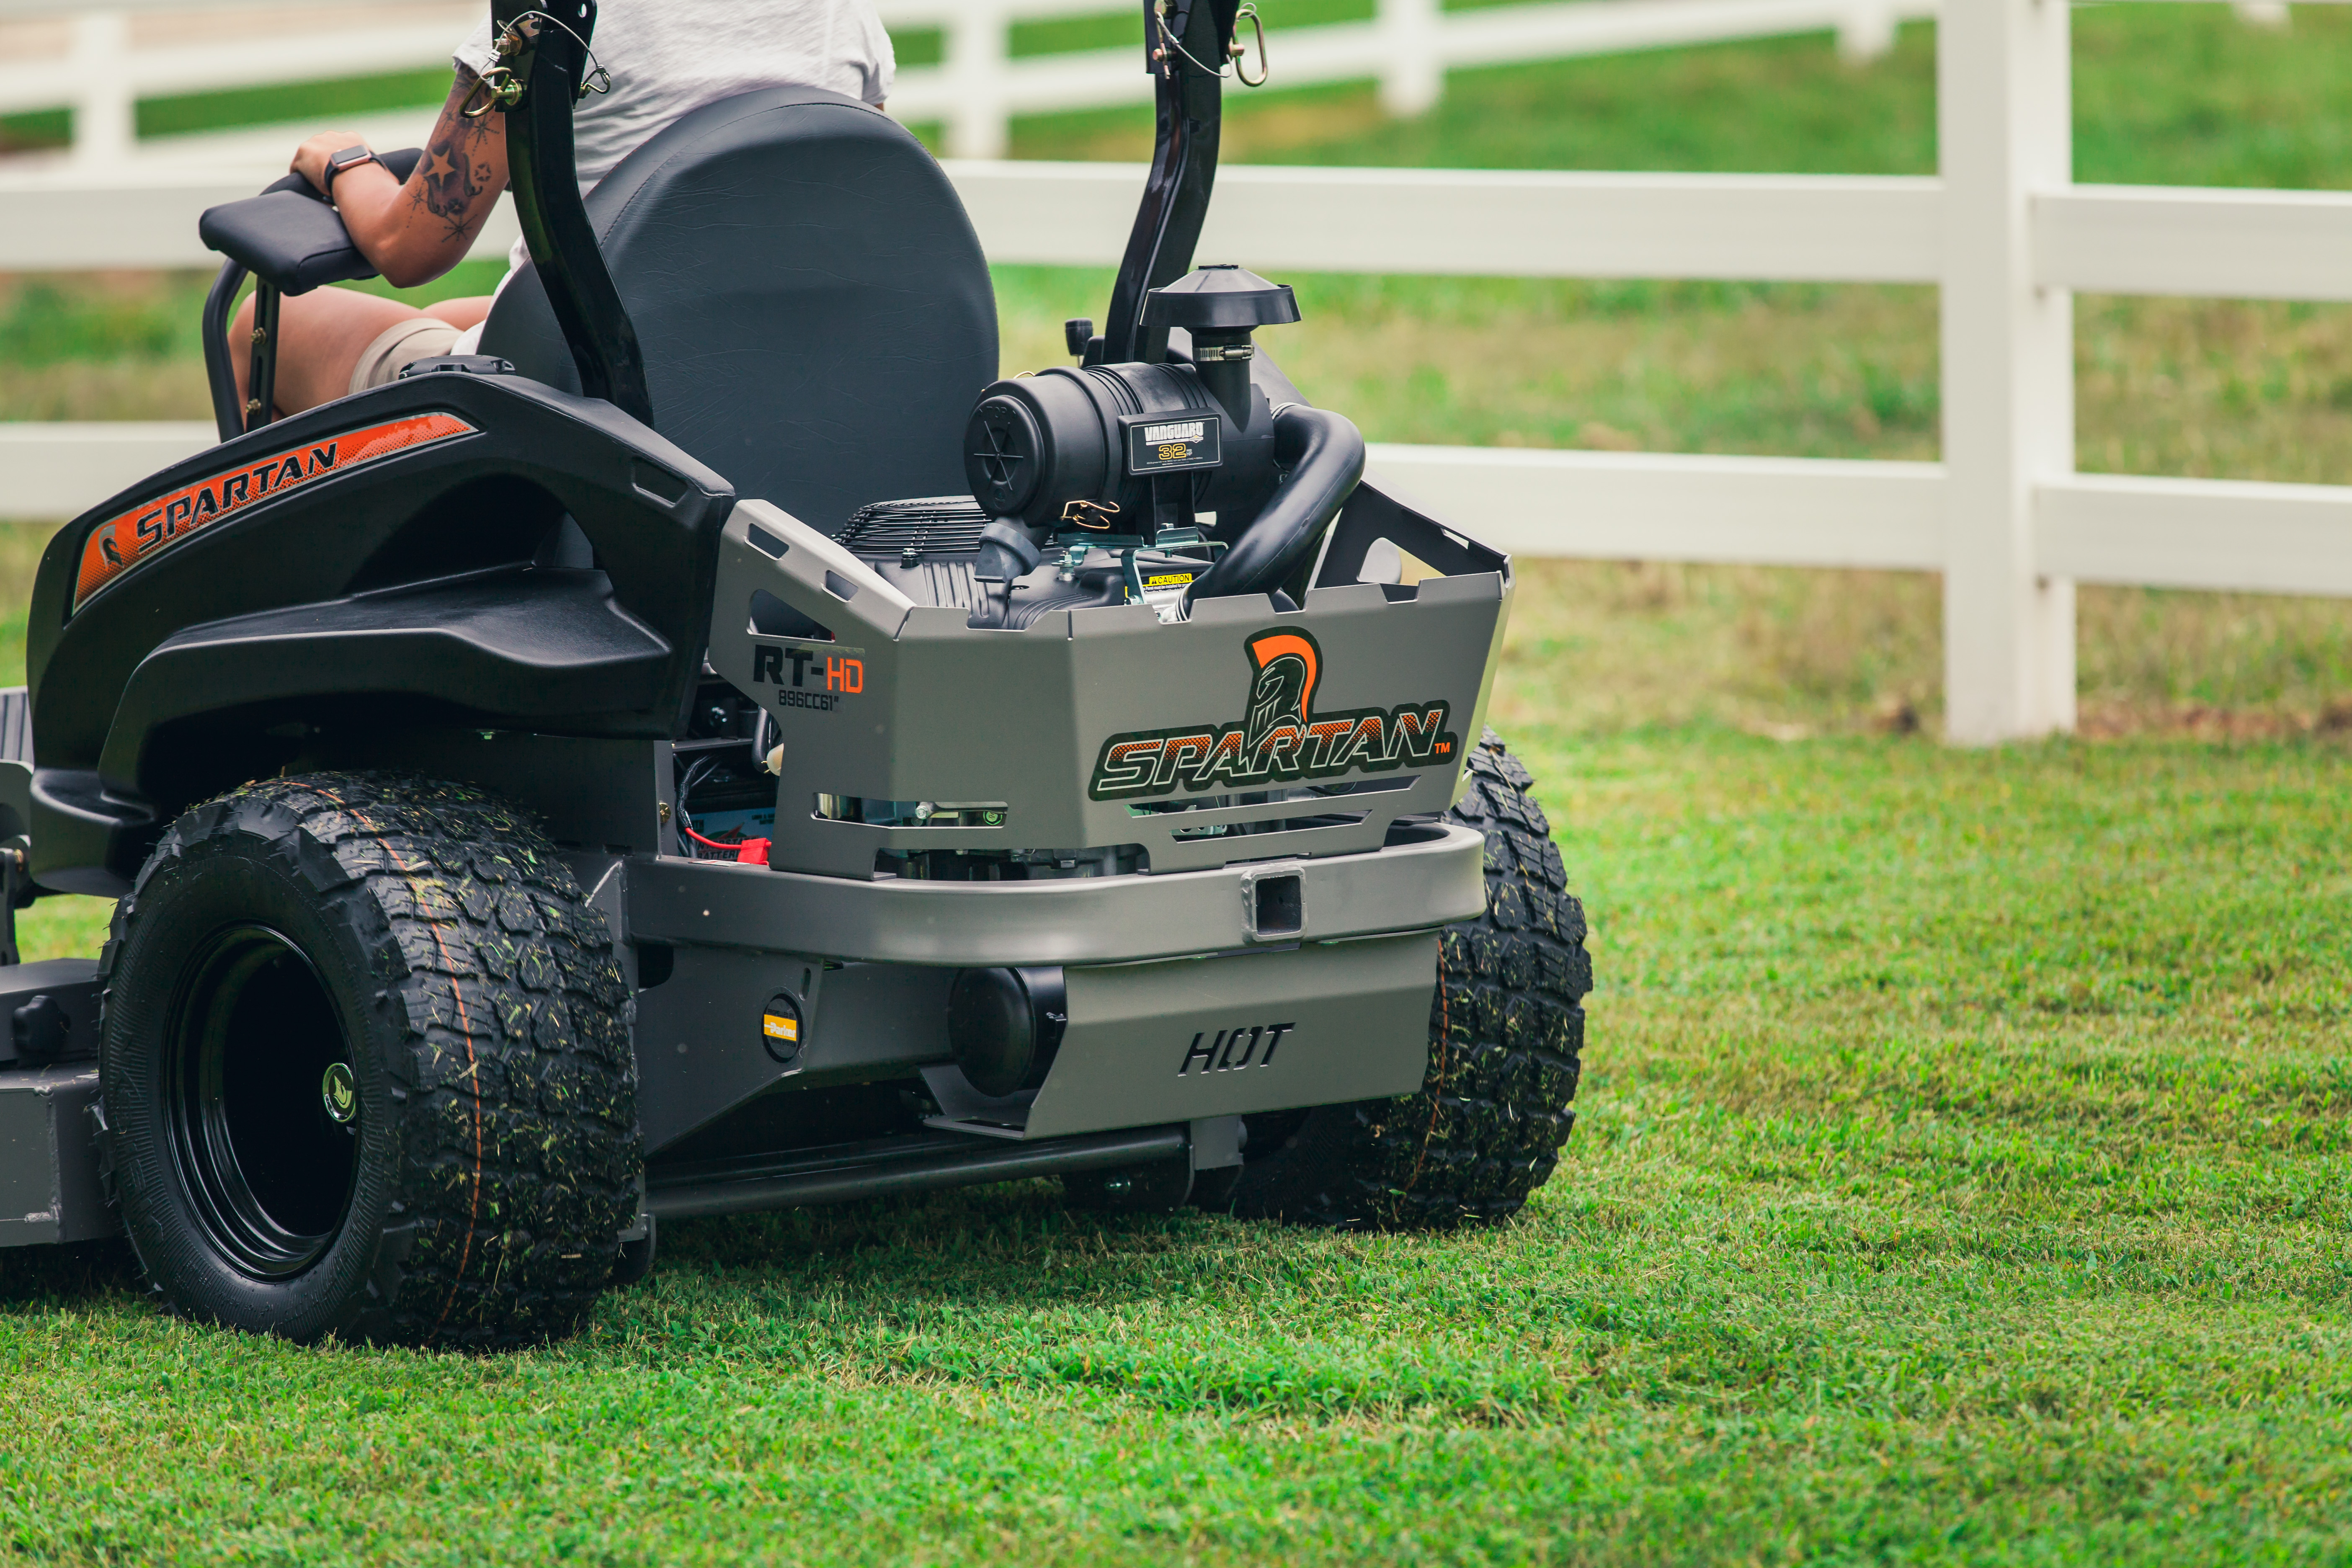 Check out the specs on all Spartan Zero Turn Mowers.